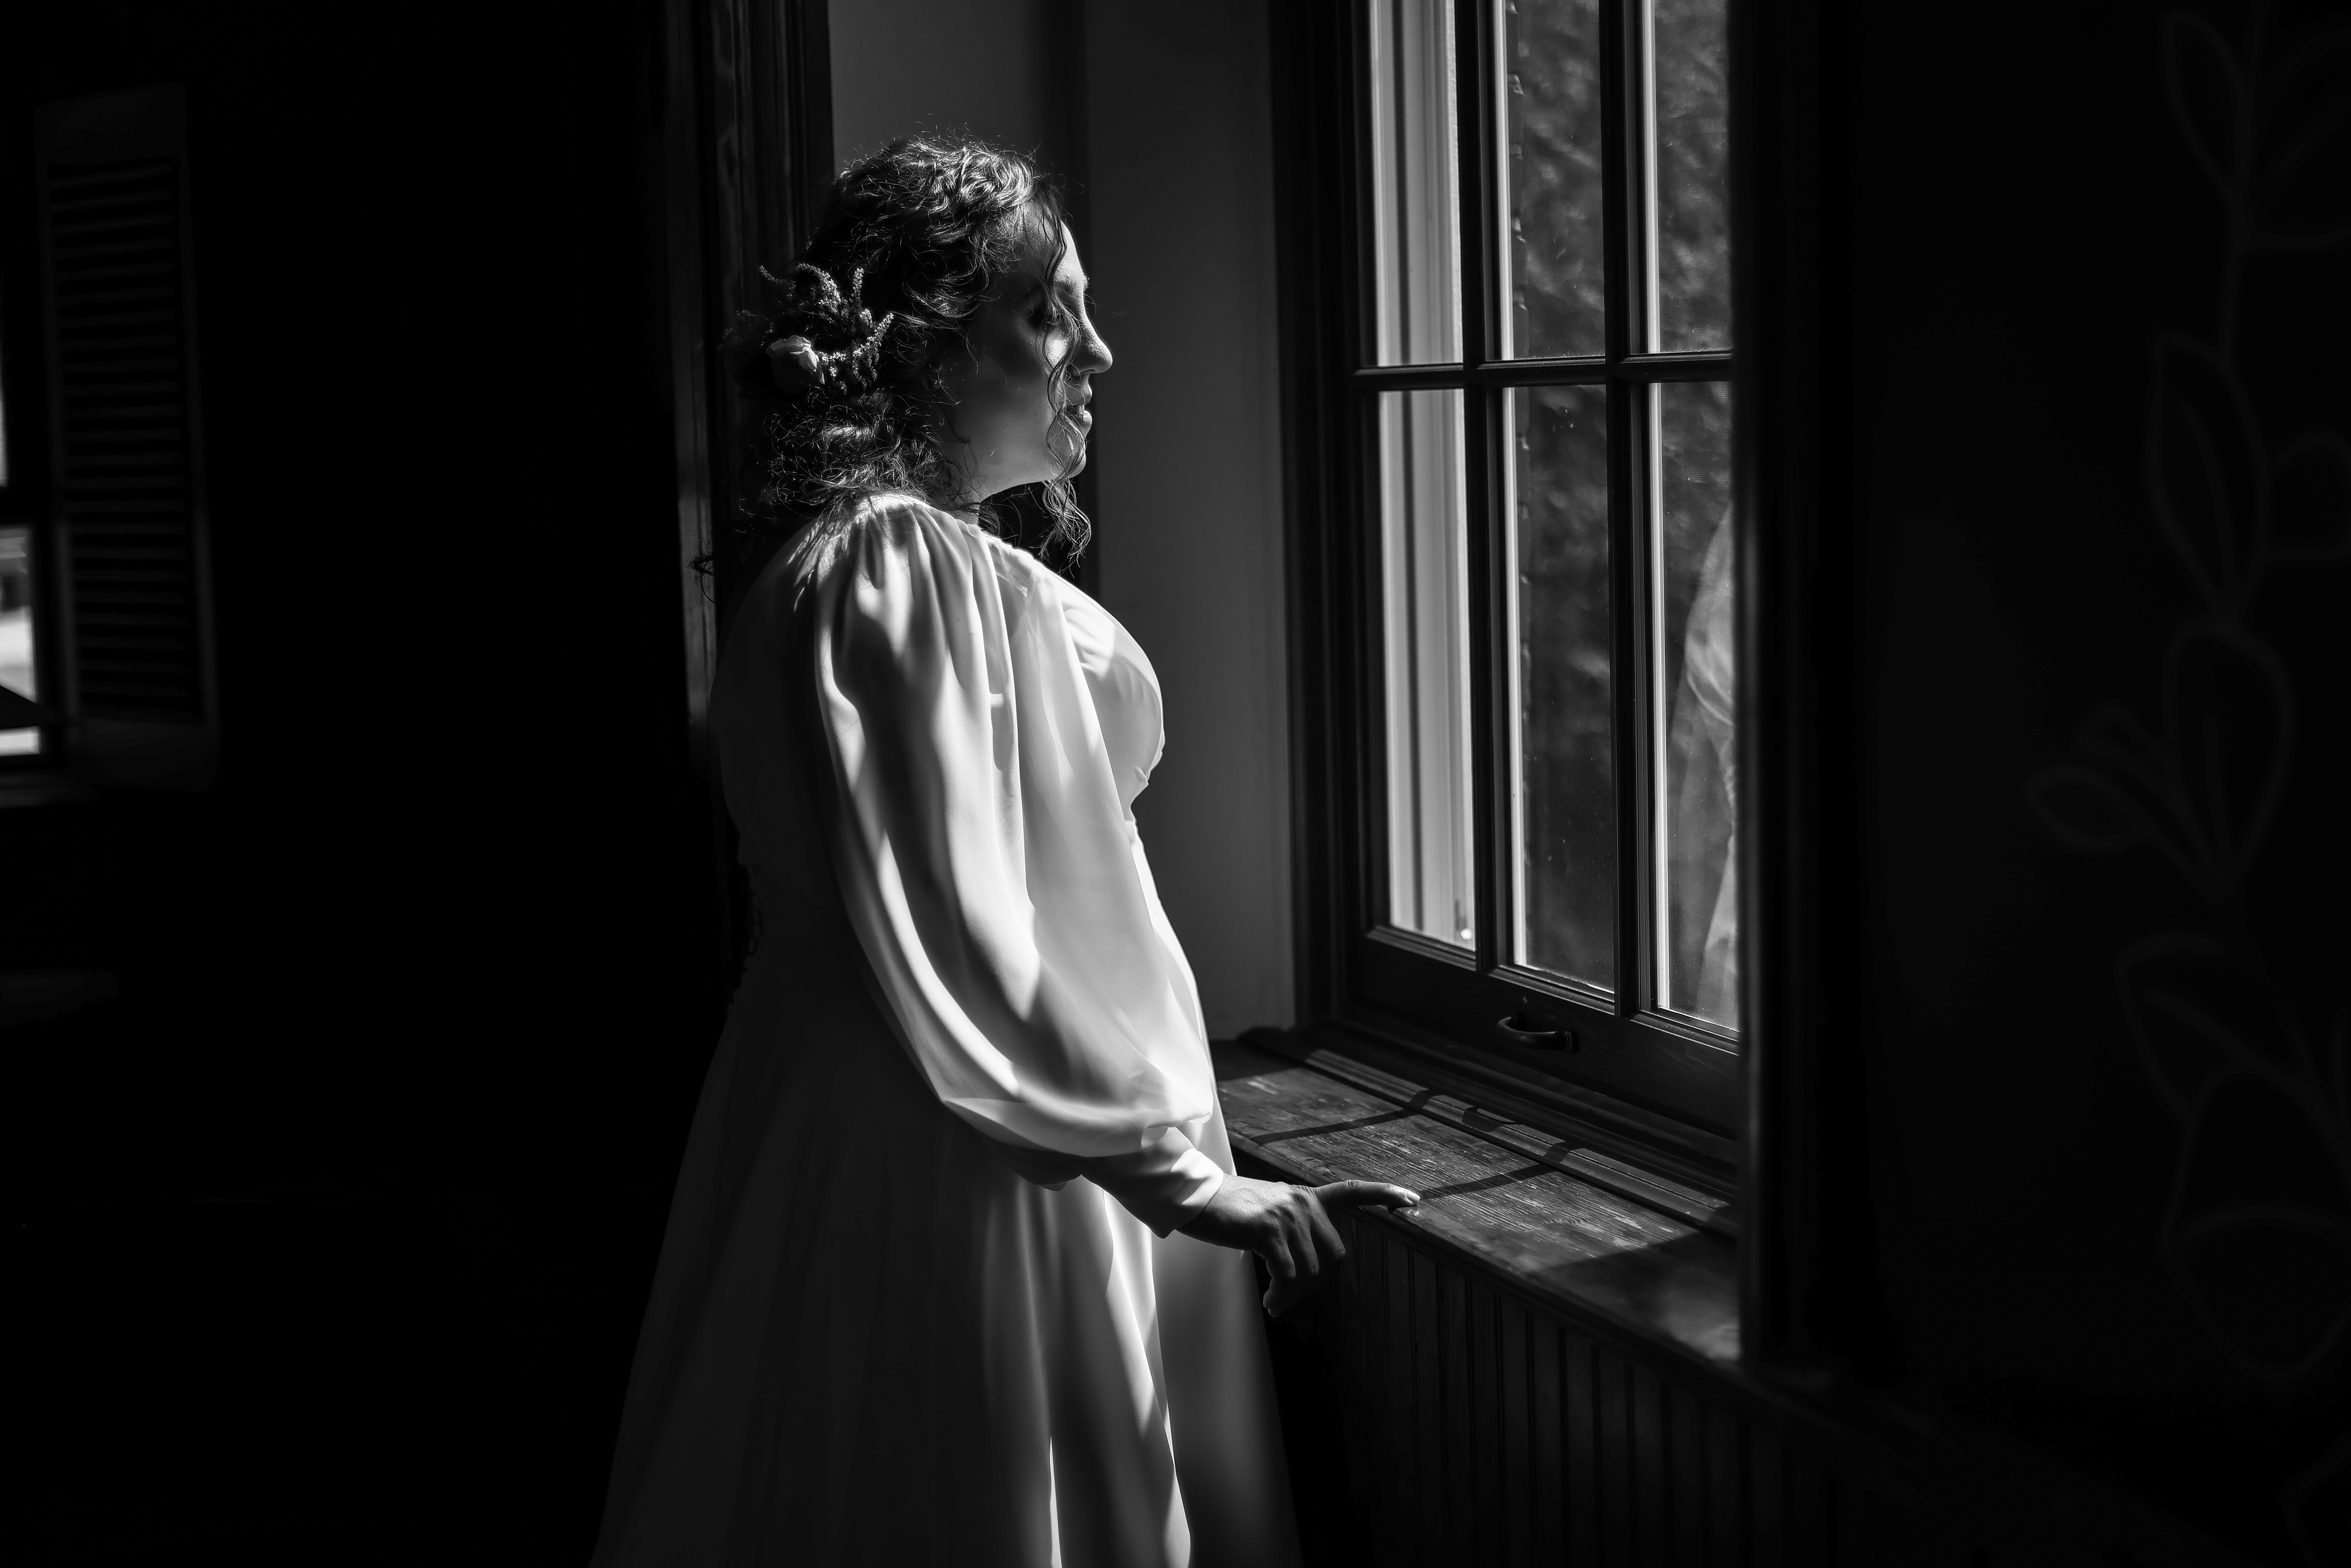 A bride ready and waiting in front of sunlit window.